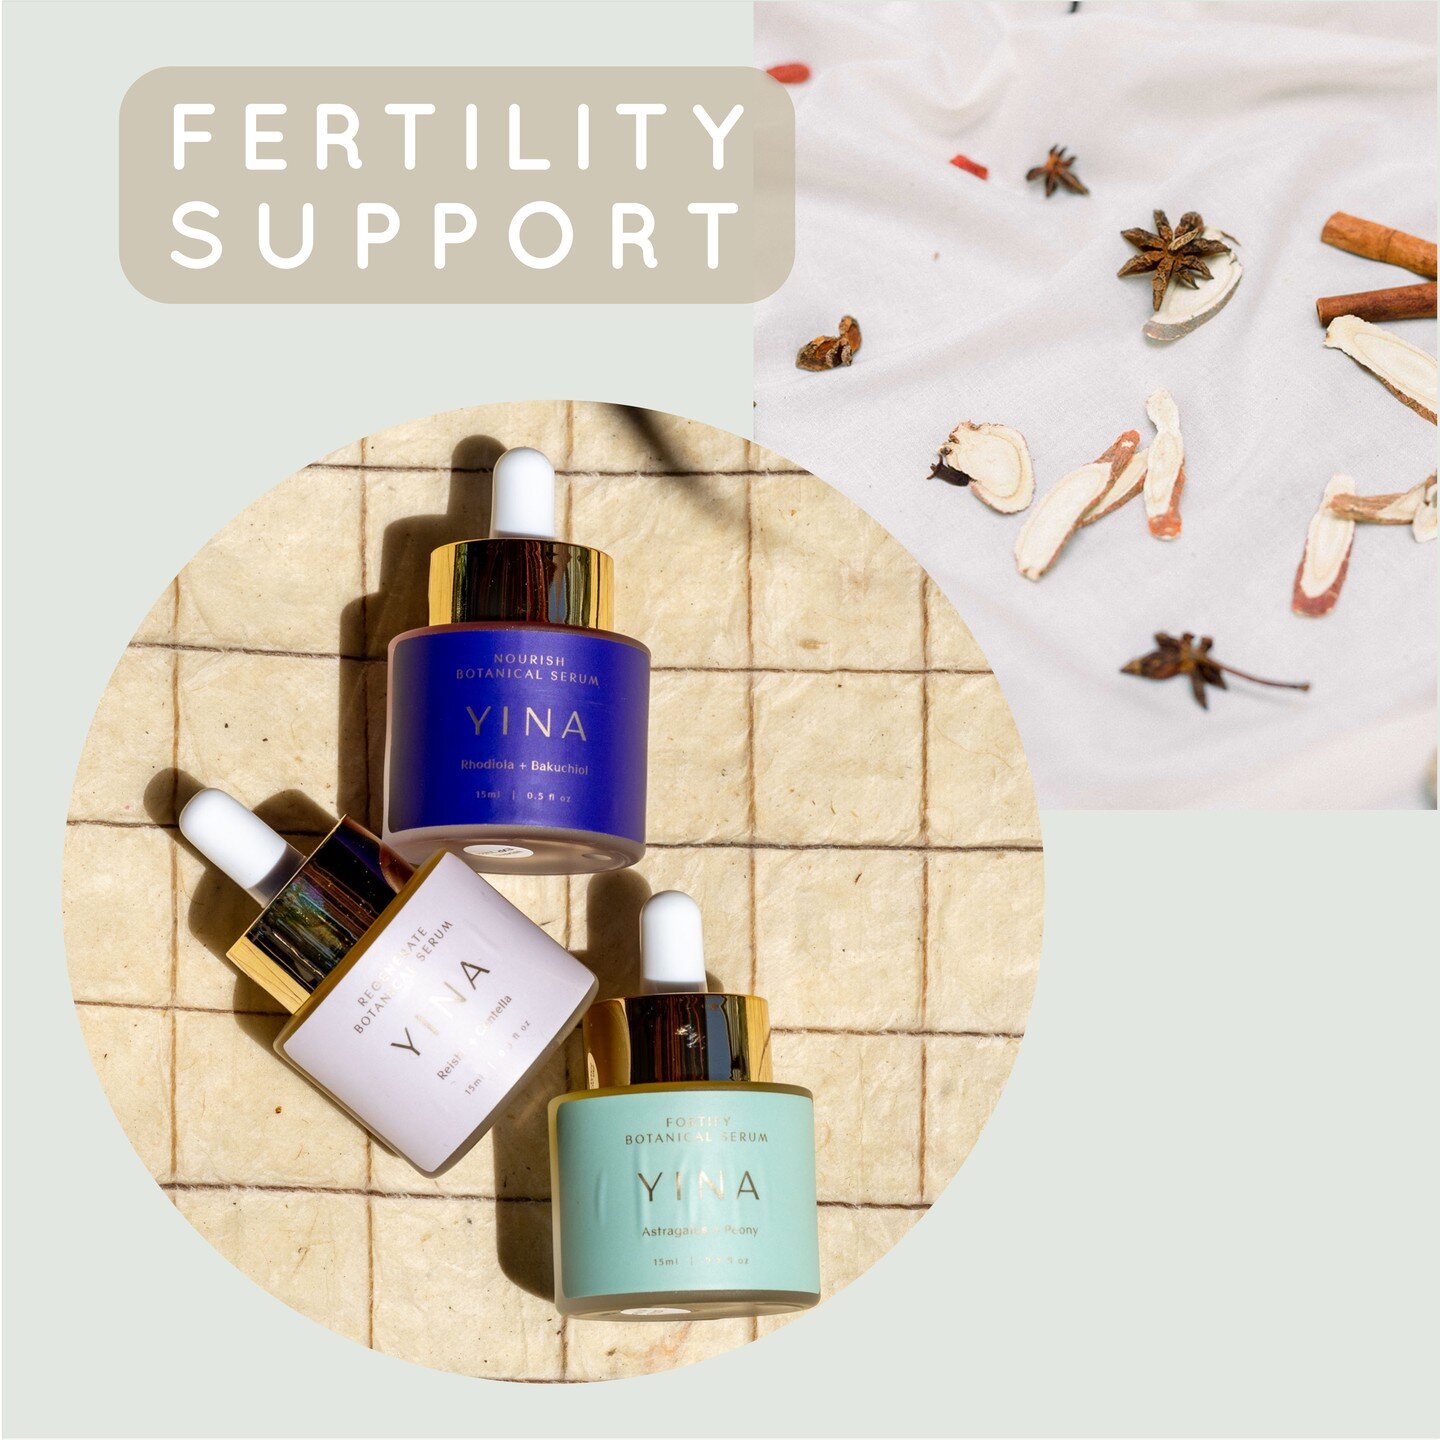 We love to support women's health. From preganacy to childbirth and beyond. In addition to facilitating many natural conceptions. I work with women through every stage of ART (assisted reproductive technologies), it is the protocol of UCSF, Pacific F